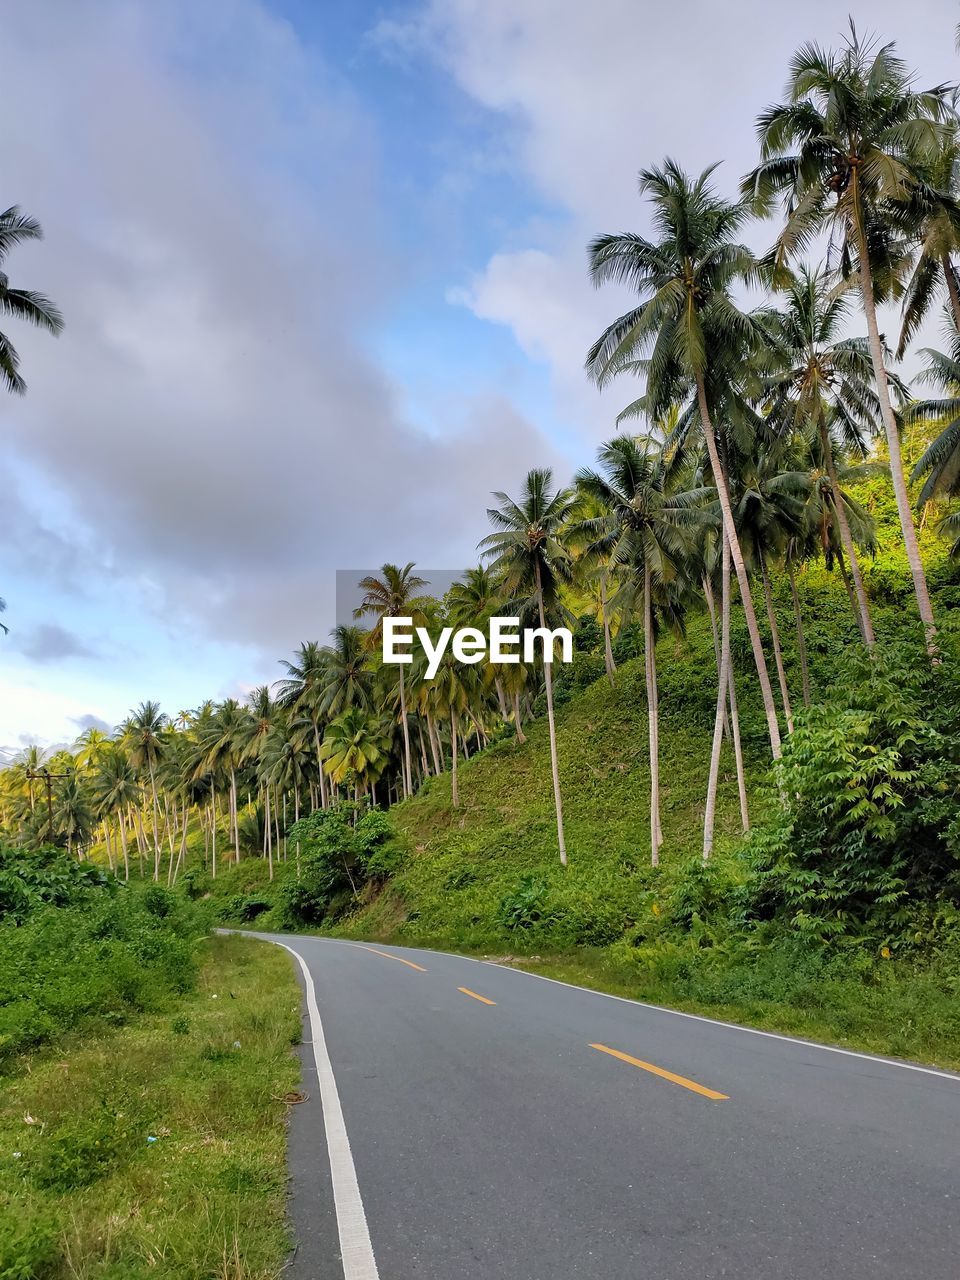 plant, tree, road, tropical climate, sky, palm tree, cloud, nature, transportation, environment, land, beauty in nature, landscape, no people, travel, scenics - nature, grass, travel destinations, green, outdoors, the way forward, tranquility, coconut palm tree, day, symbol, vegetation, non-urban scene, sign, tourism, tropical tree, tranquil scene, street, rural area, road marking, island, trip, vacation, growth, holiday, diminishing perspective, idyllic, rural scene